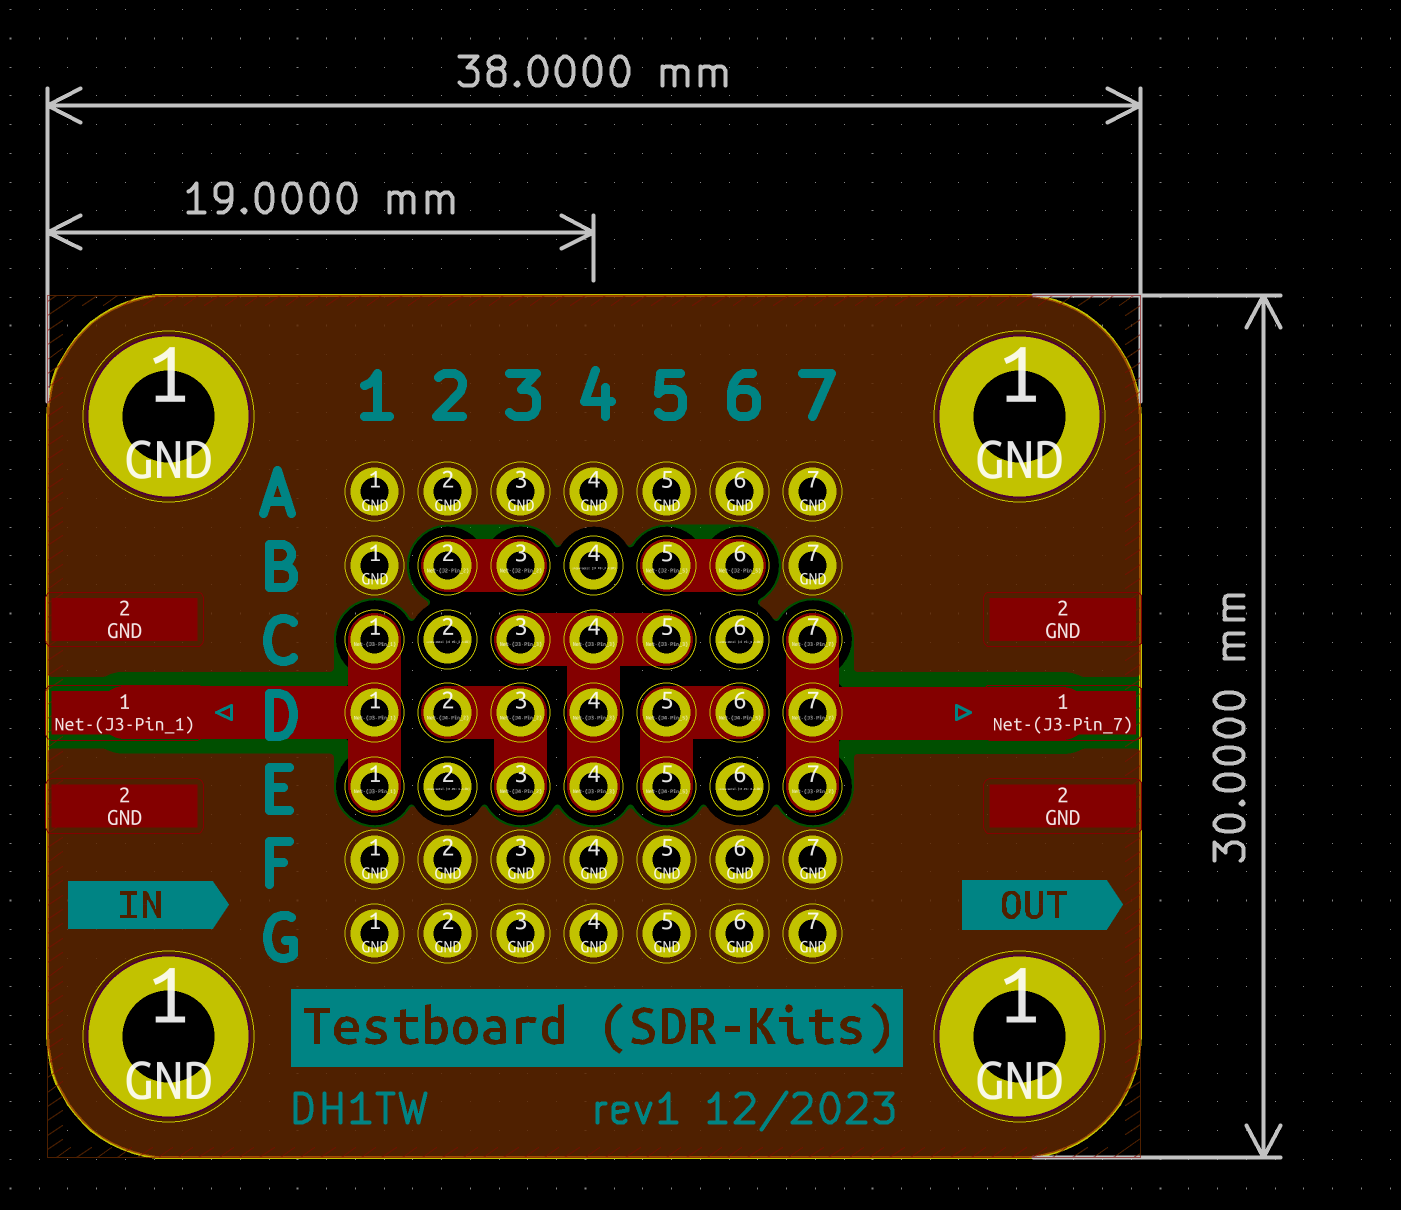 The PCB Layout of the VNA testboard